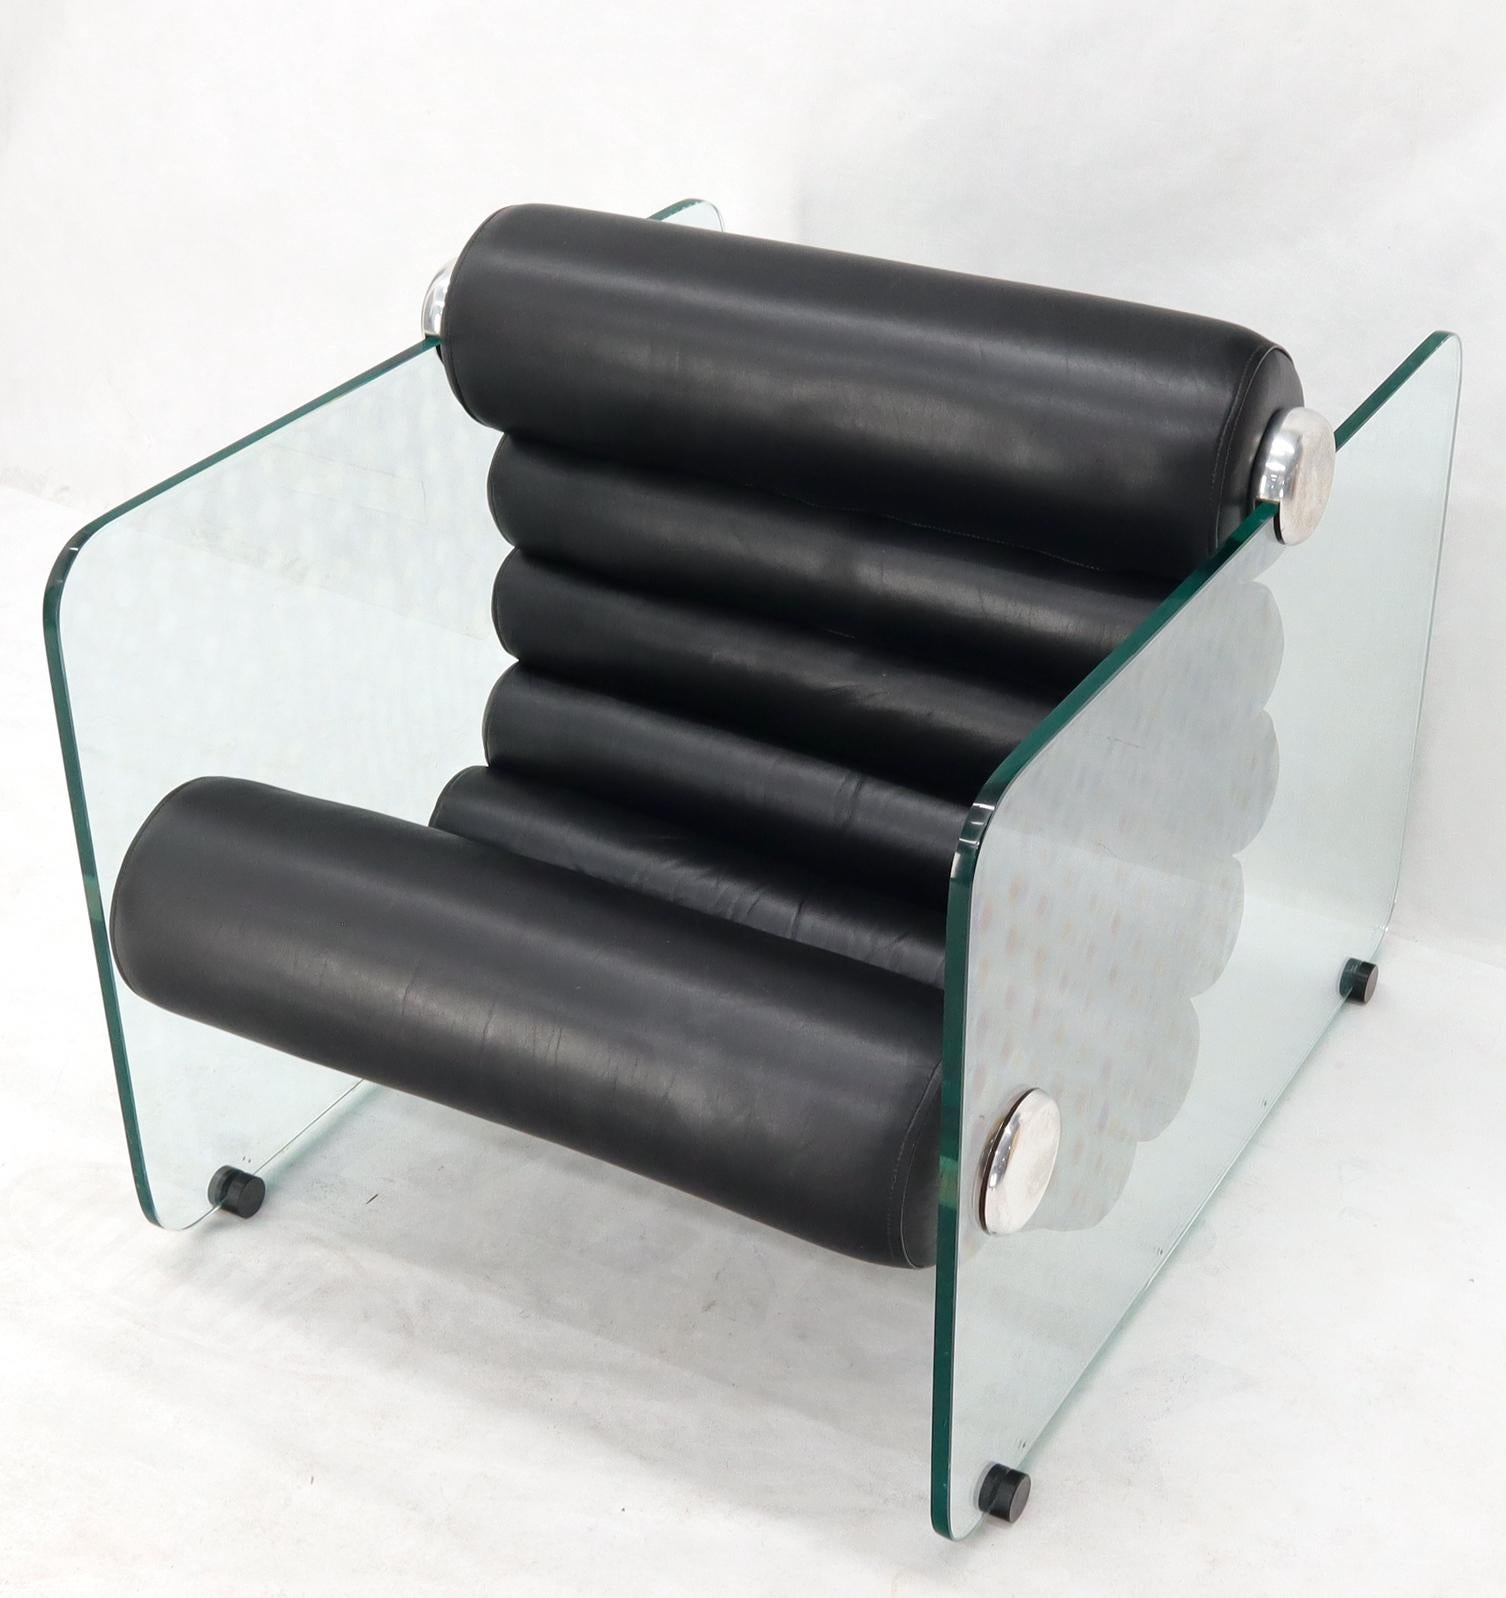 Fabio Lenci Hyaline Adjustable MCM Lounge Chair Glass Black Leather 1970s MINT! For Sale 3